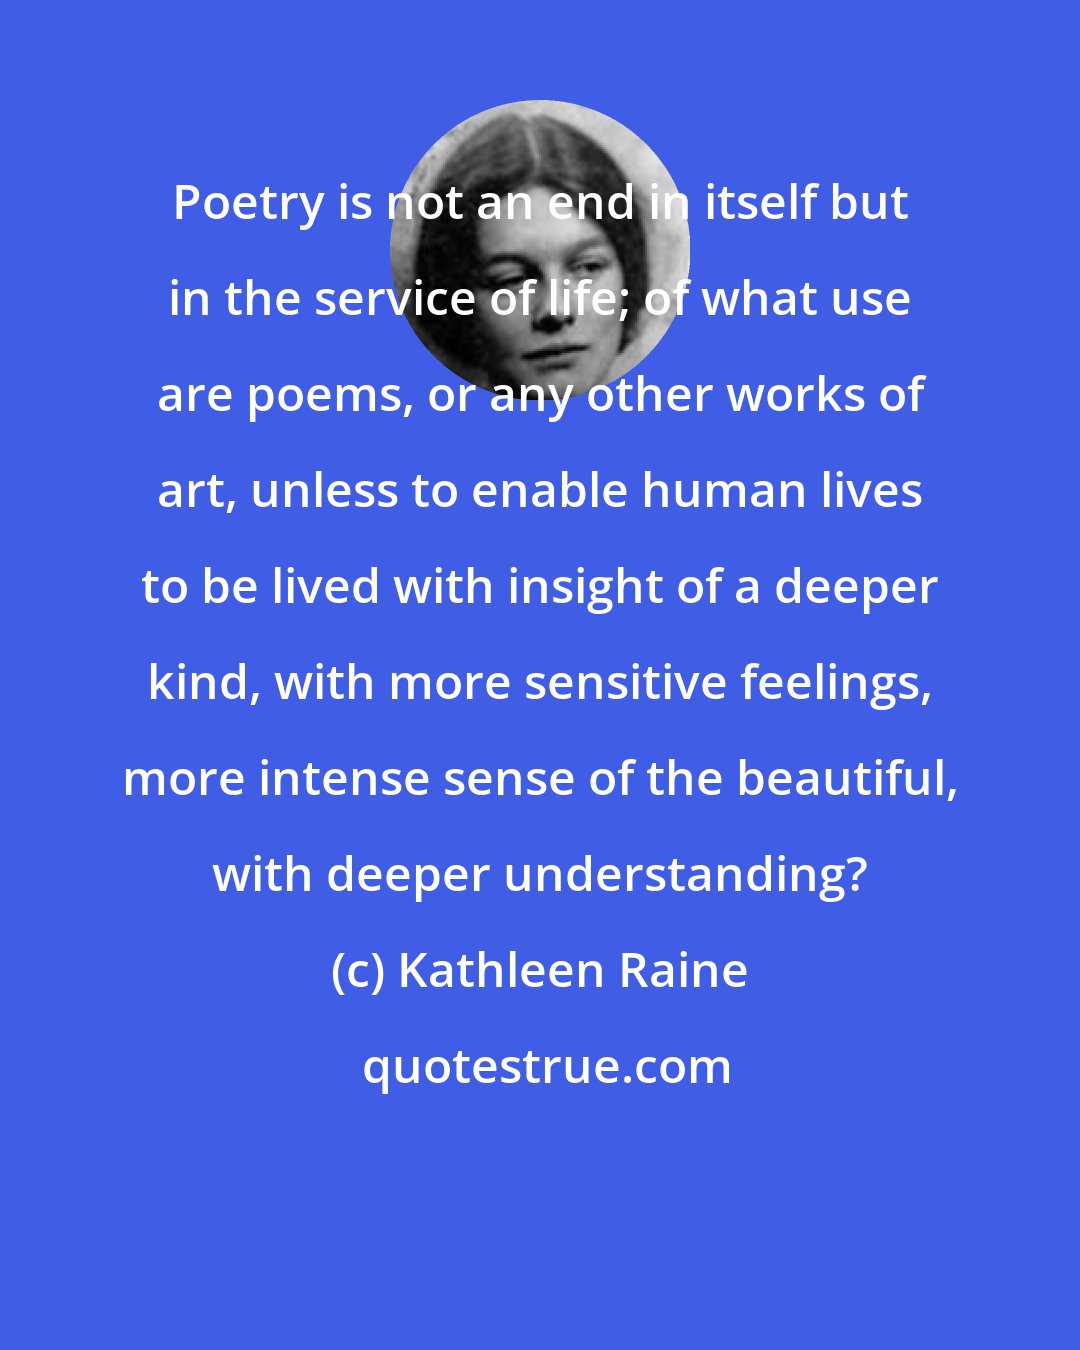 Kathleen Raine: Poetry is not an end in itself but in the service of life; of what use are poems, or any other works of art, unless to enable human lives to be lived with insight of a deeper kind, with more sensitive feelings, more intense sense of the beautiful, with deeper understanding?